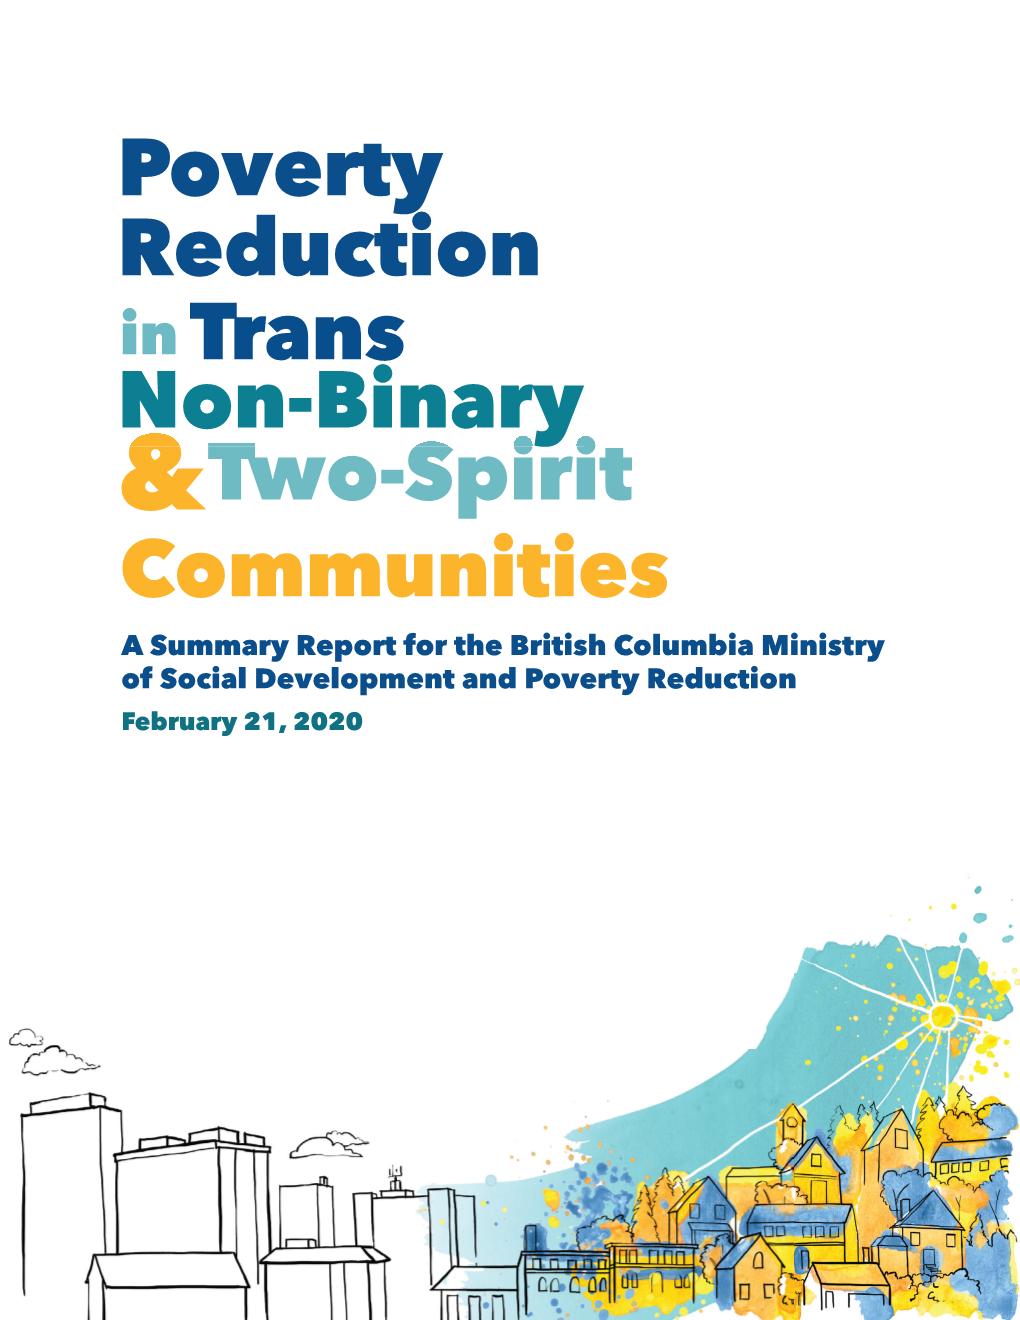 Poverty Reduction in Trans, Non-Binary, and Two-Spirit